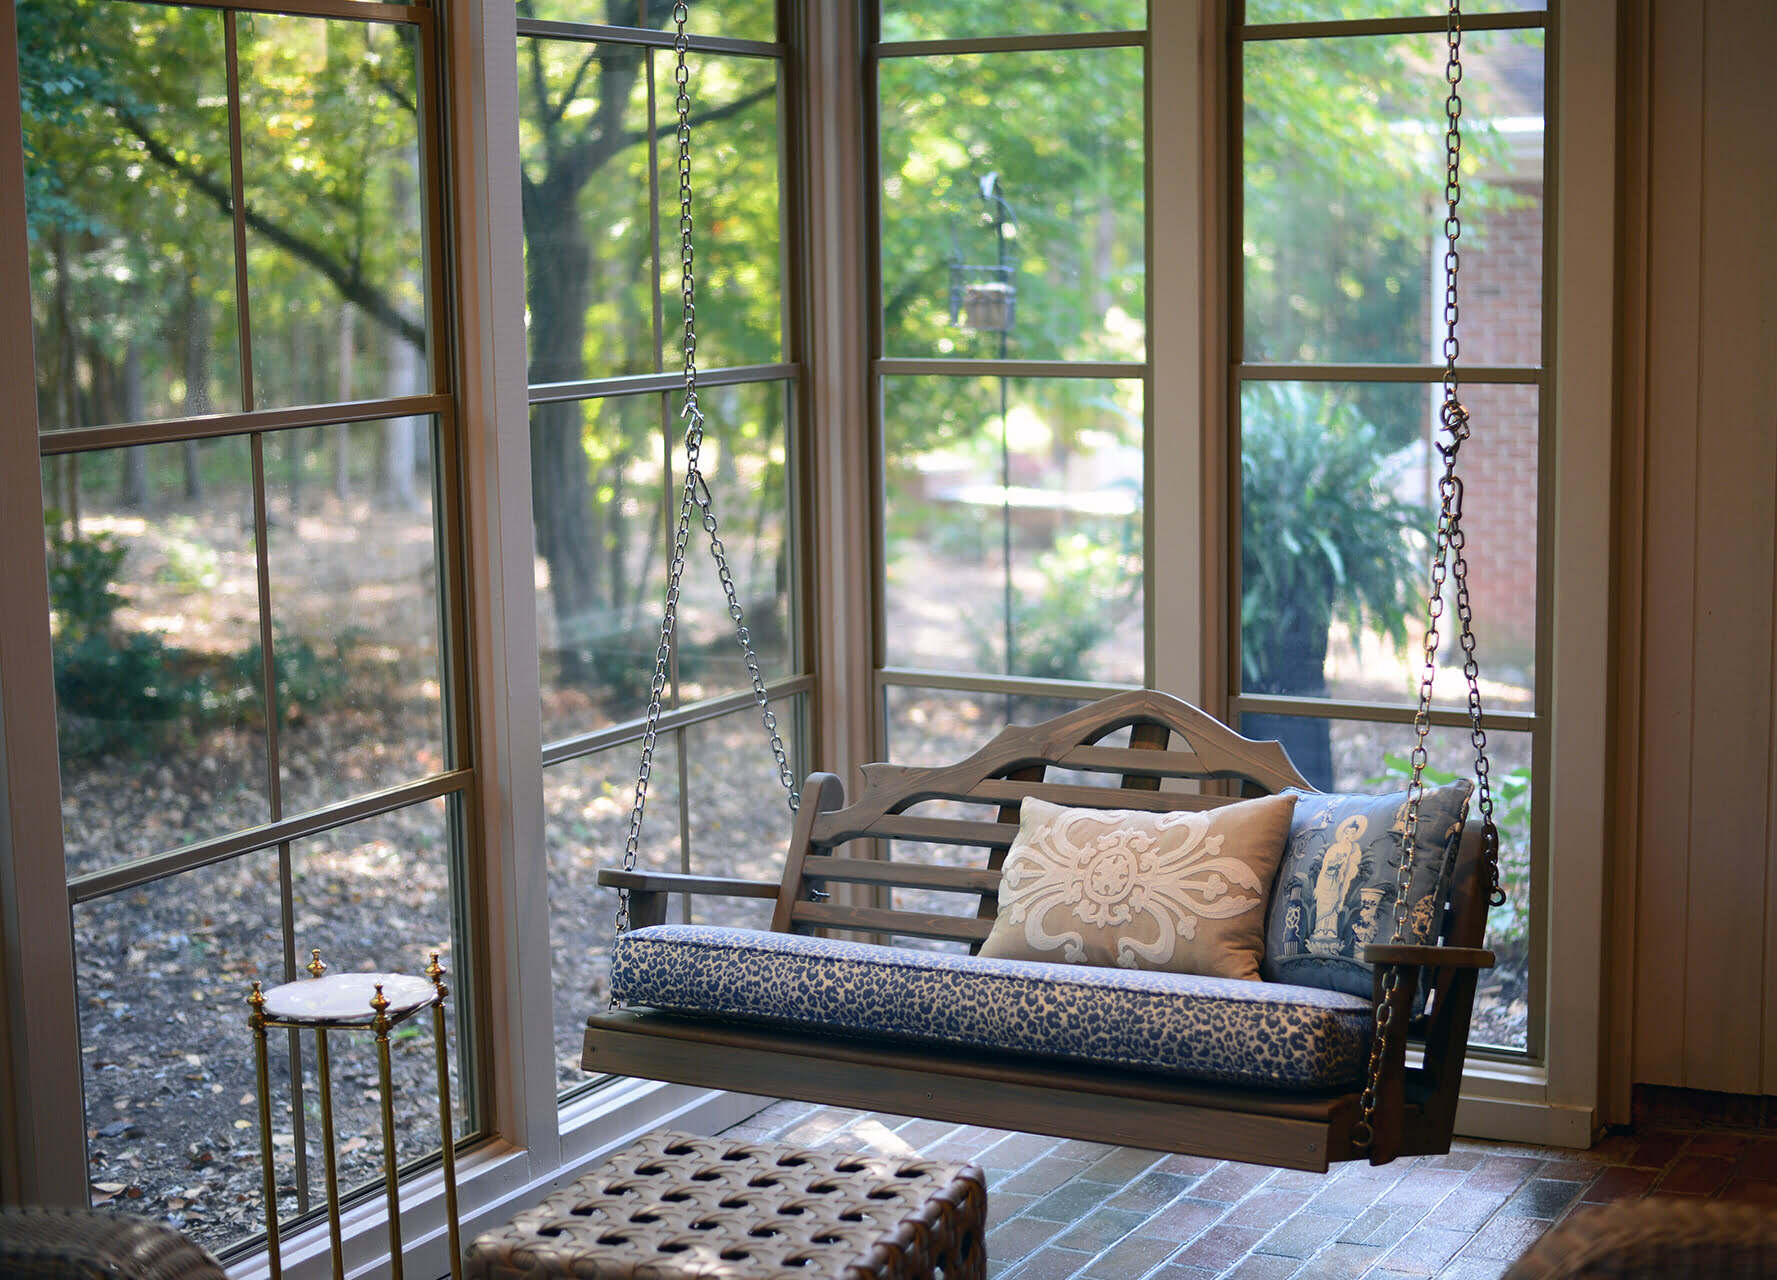 How To Get Pollen Off Screened Porch